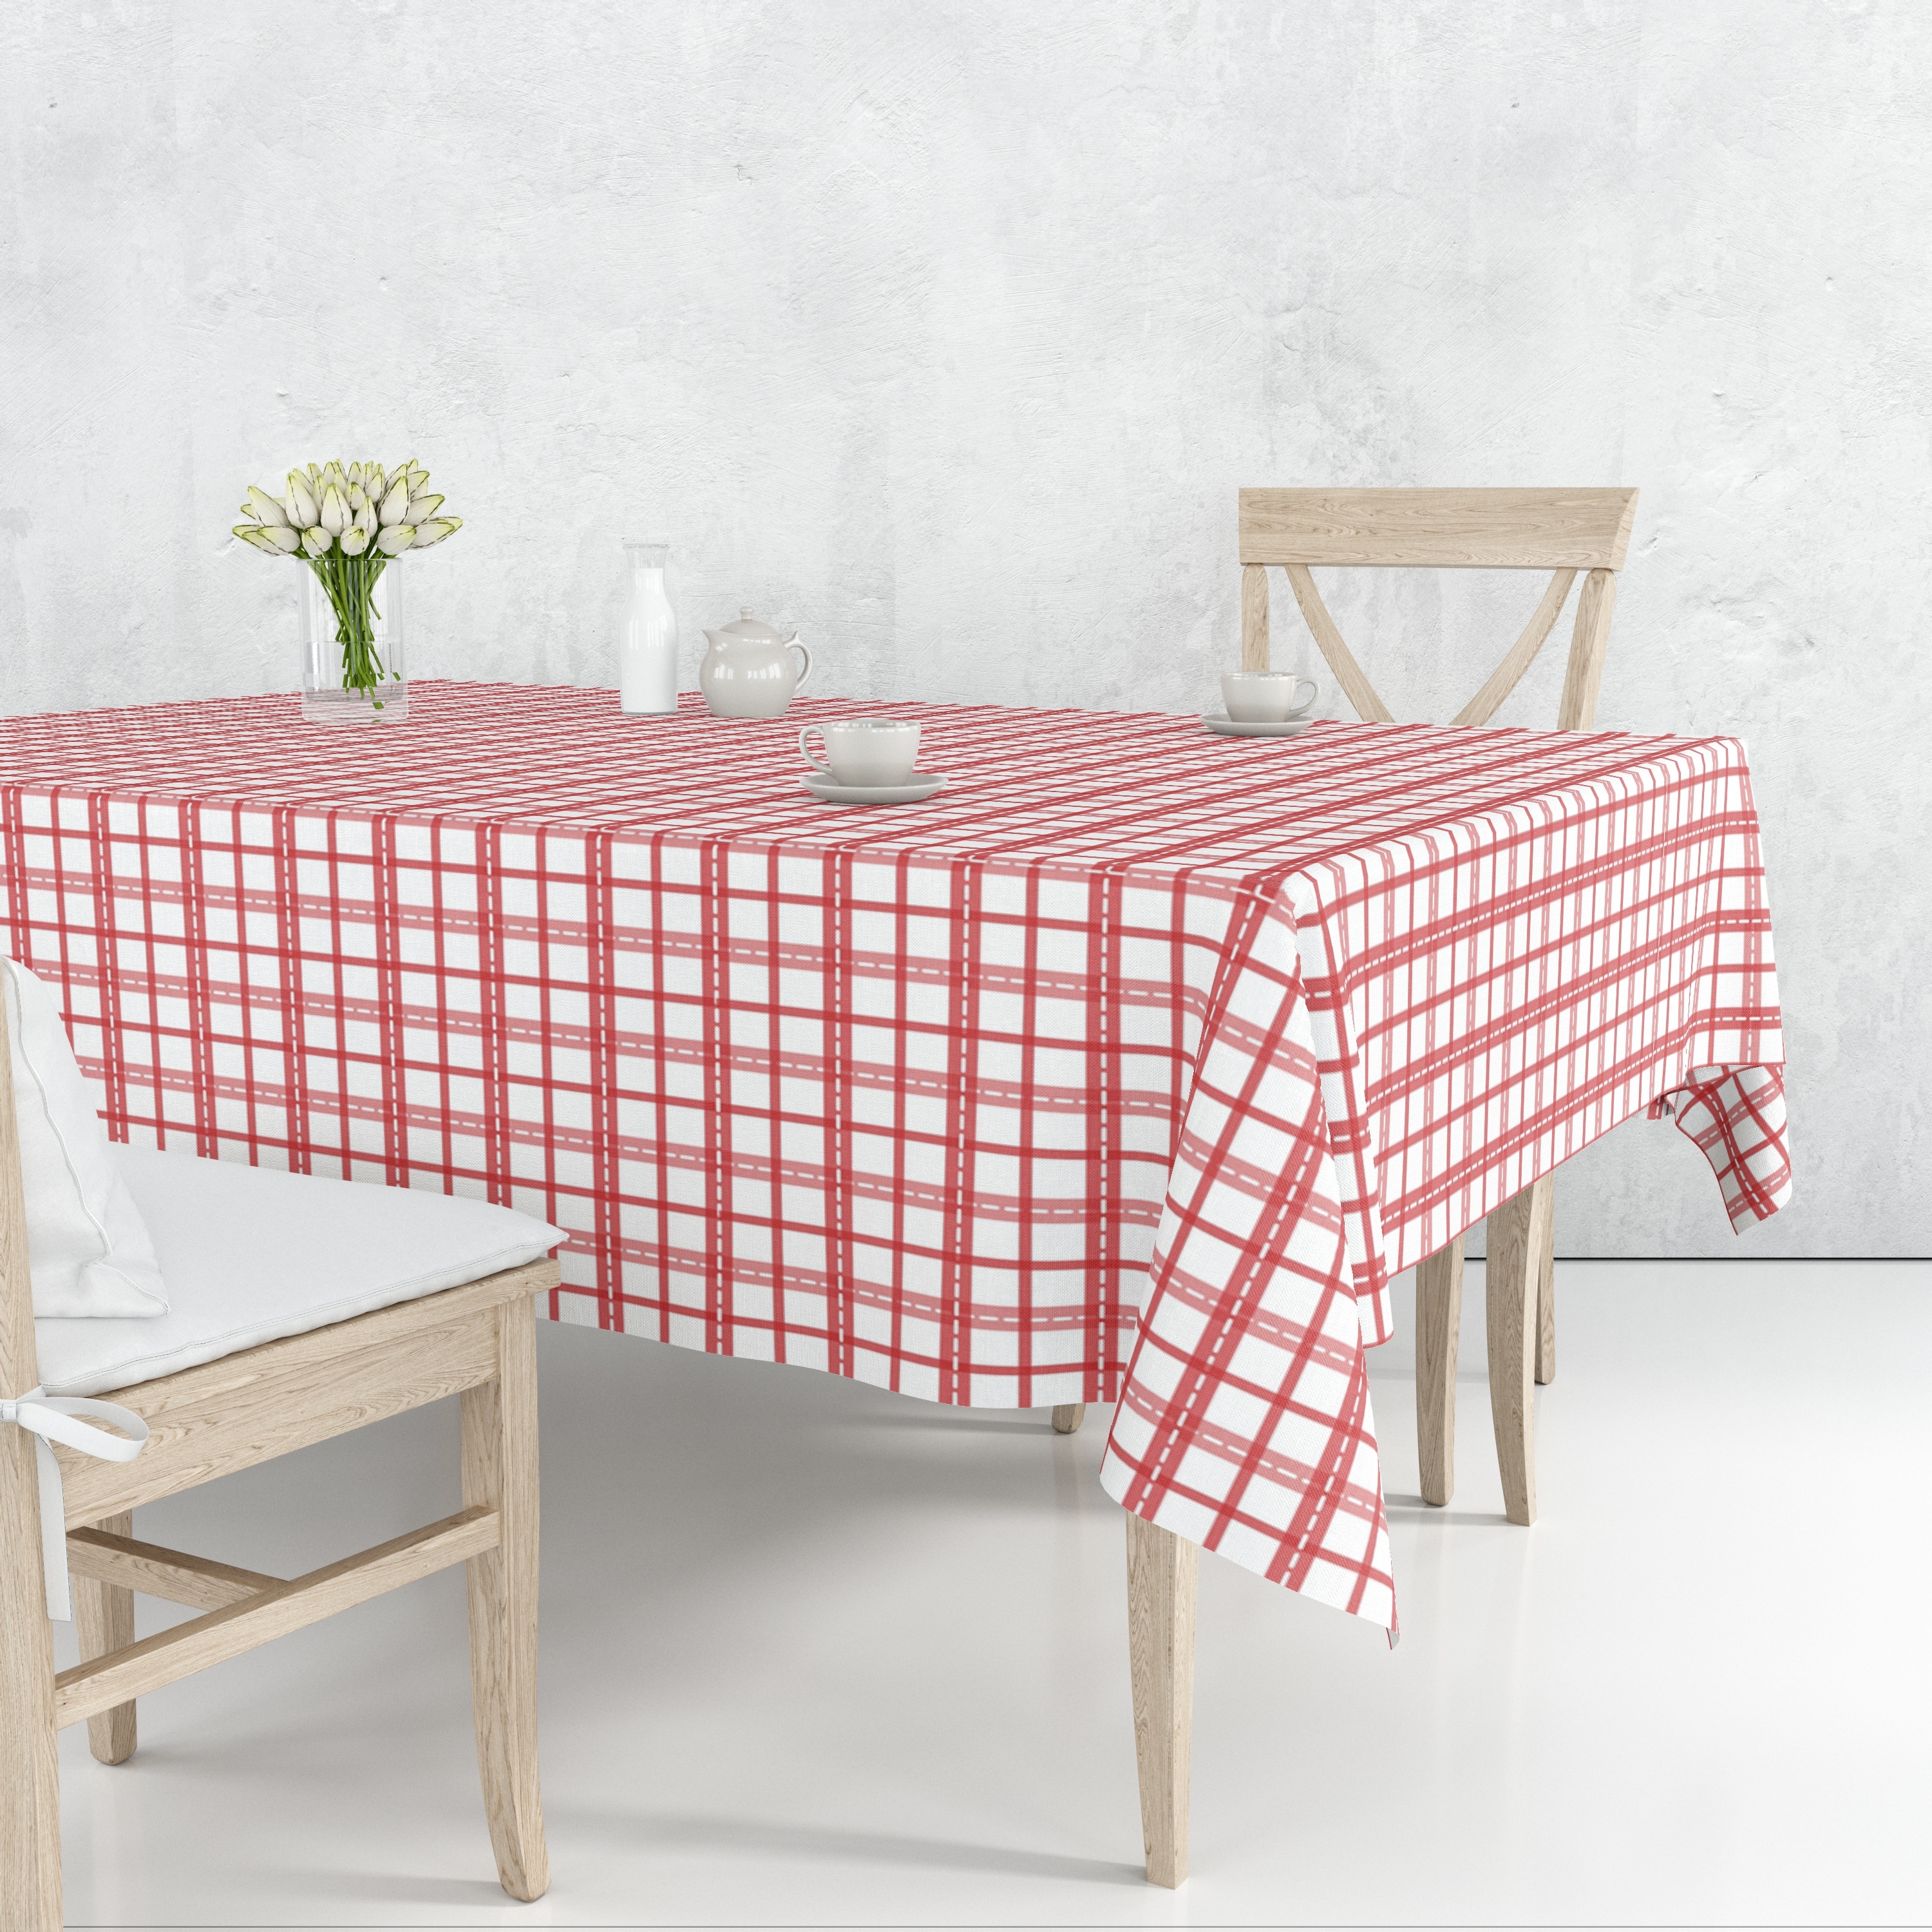 https://ak1.ostkcdn.com/images/products/is/images/direct/117145da53bdc1ee41d2f764cb5e73b5f530e23e/Fabstyles-Winter-Plaid-High-Quality-Cotton-Tablecloth.jpg